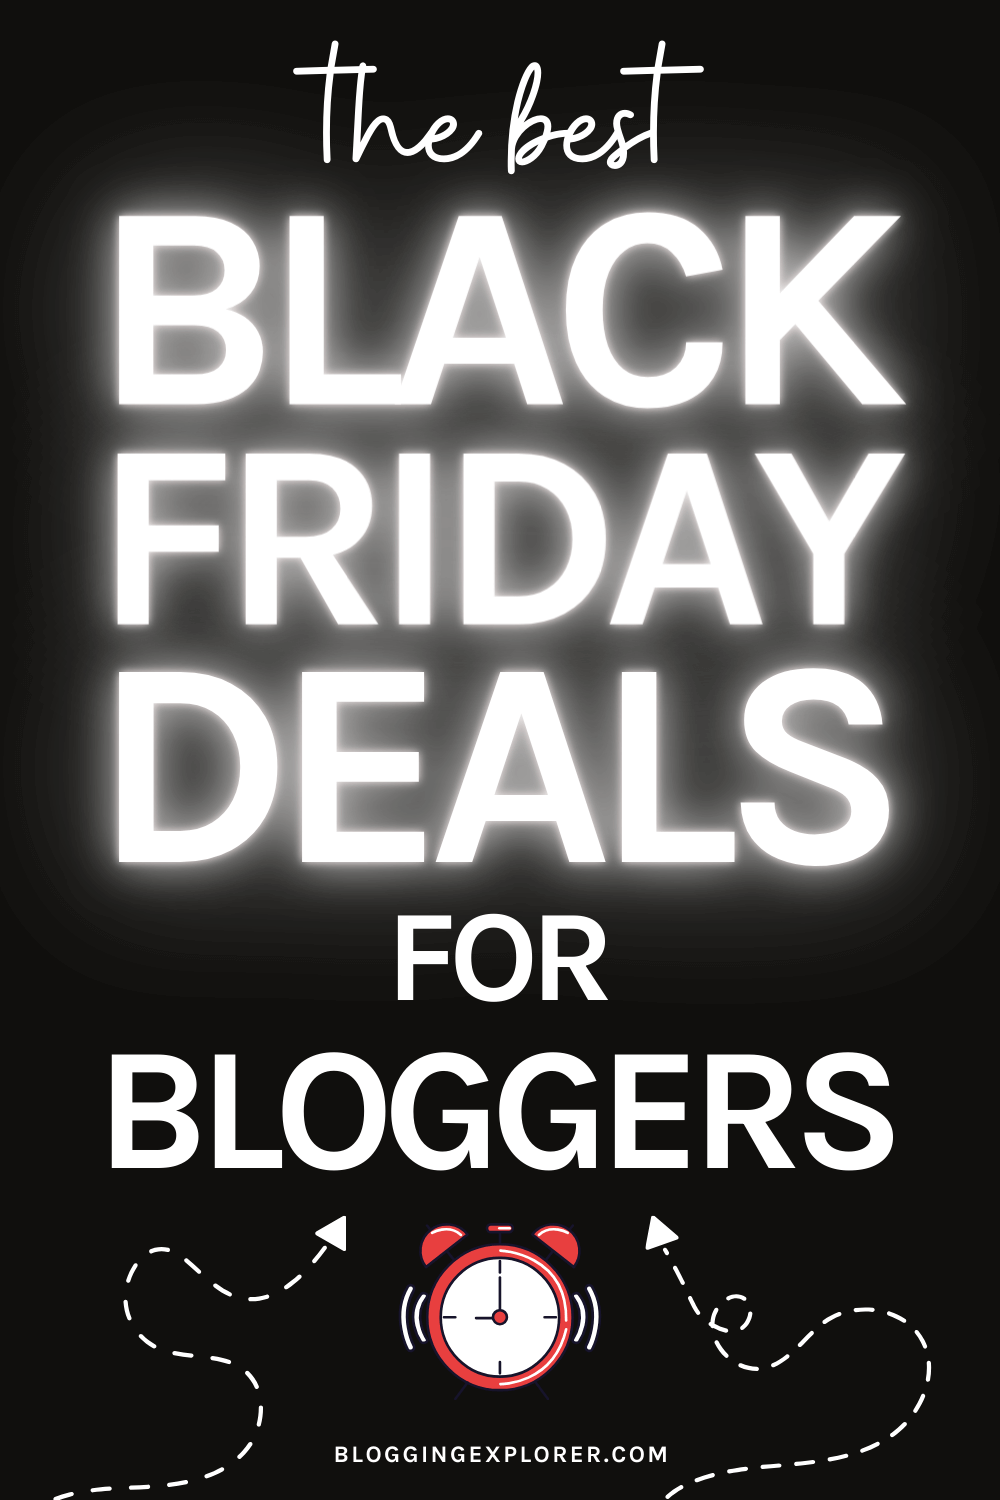 Black Friday deals for bloggers – Best blogging tools and resources